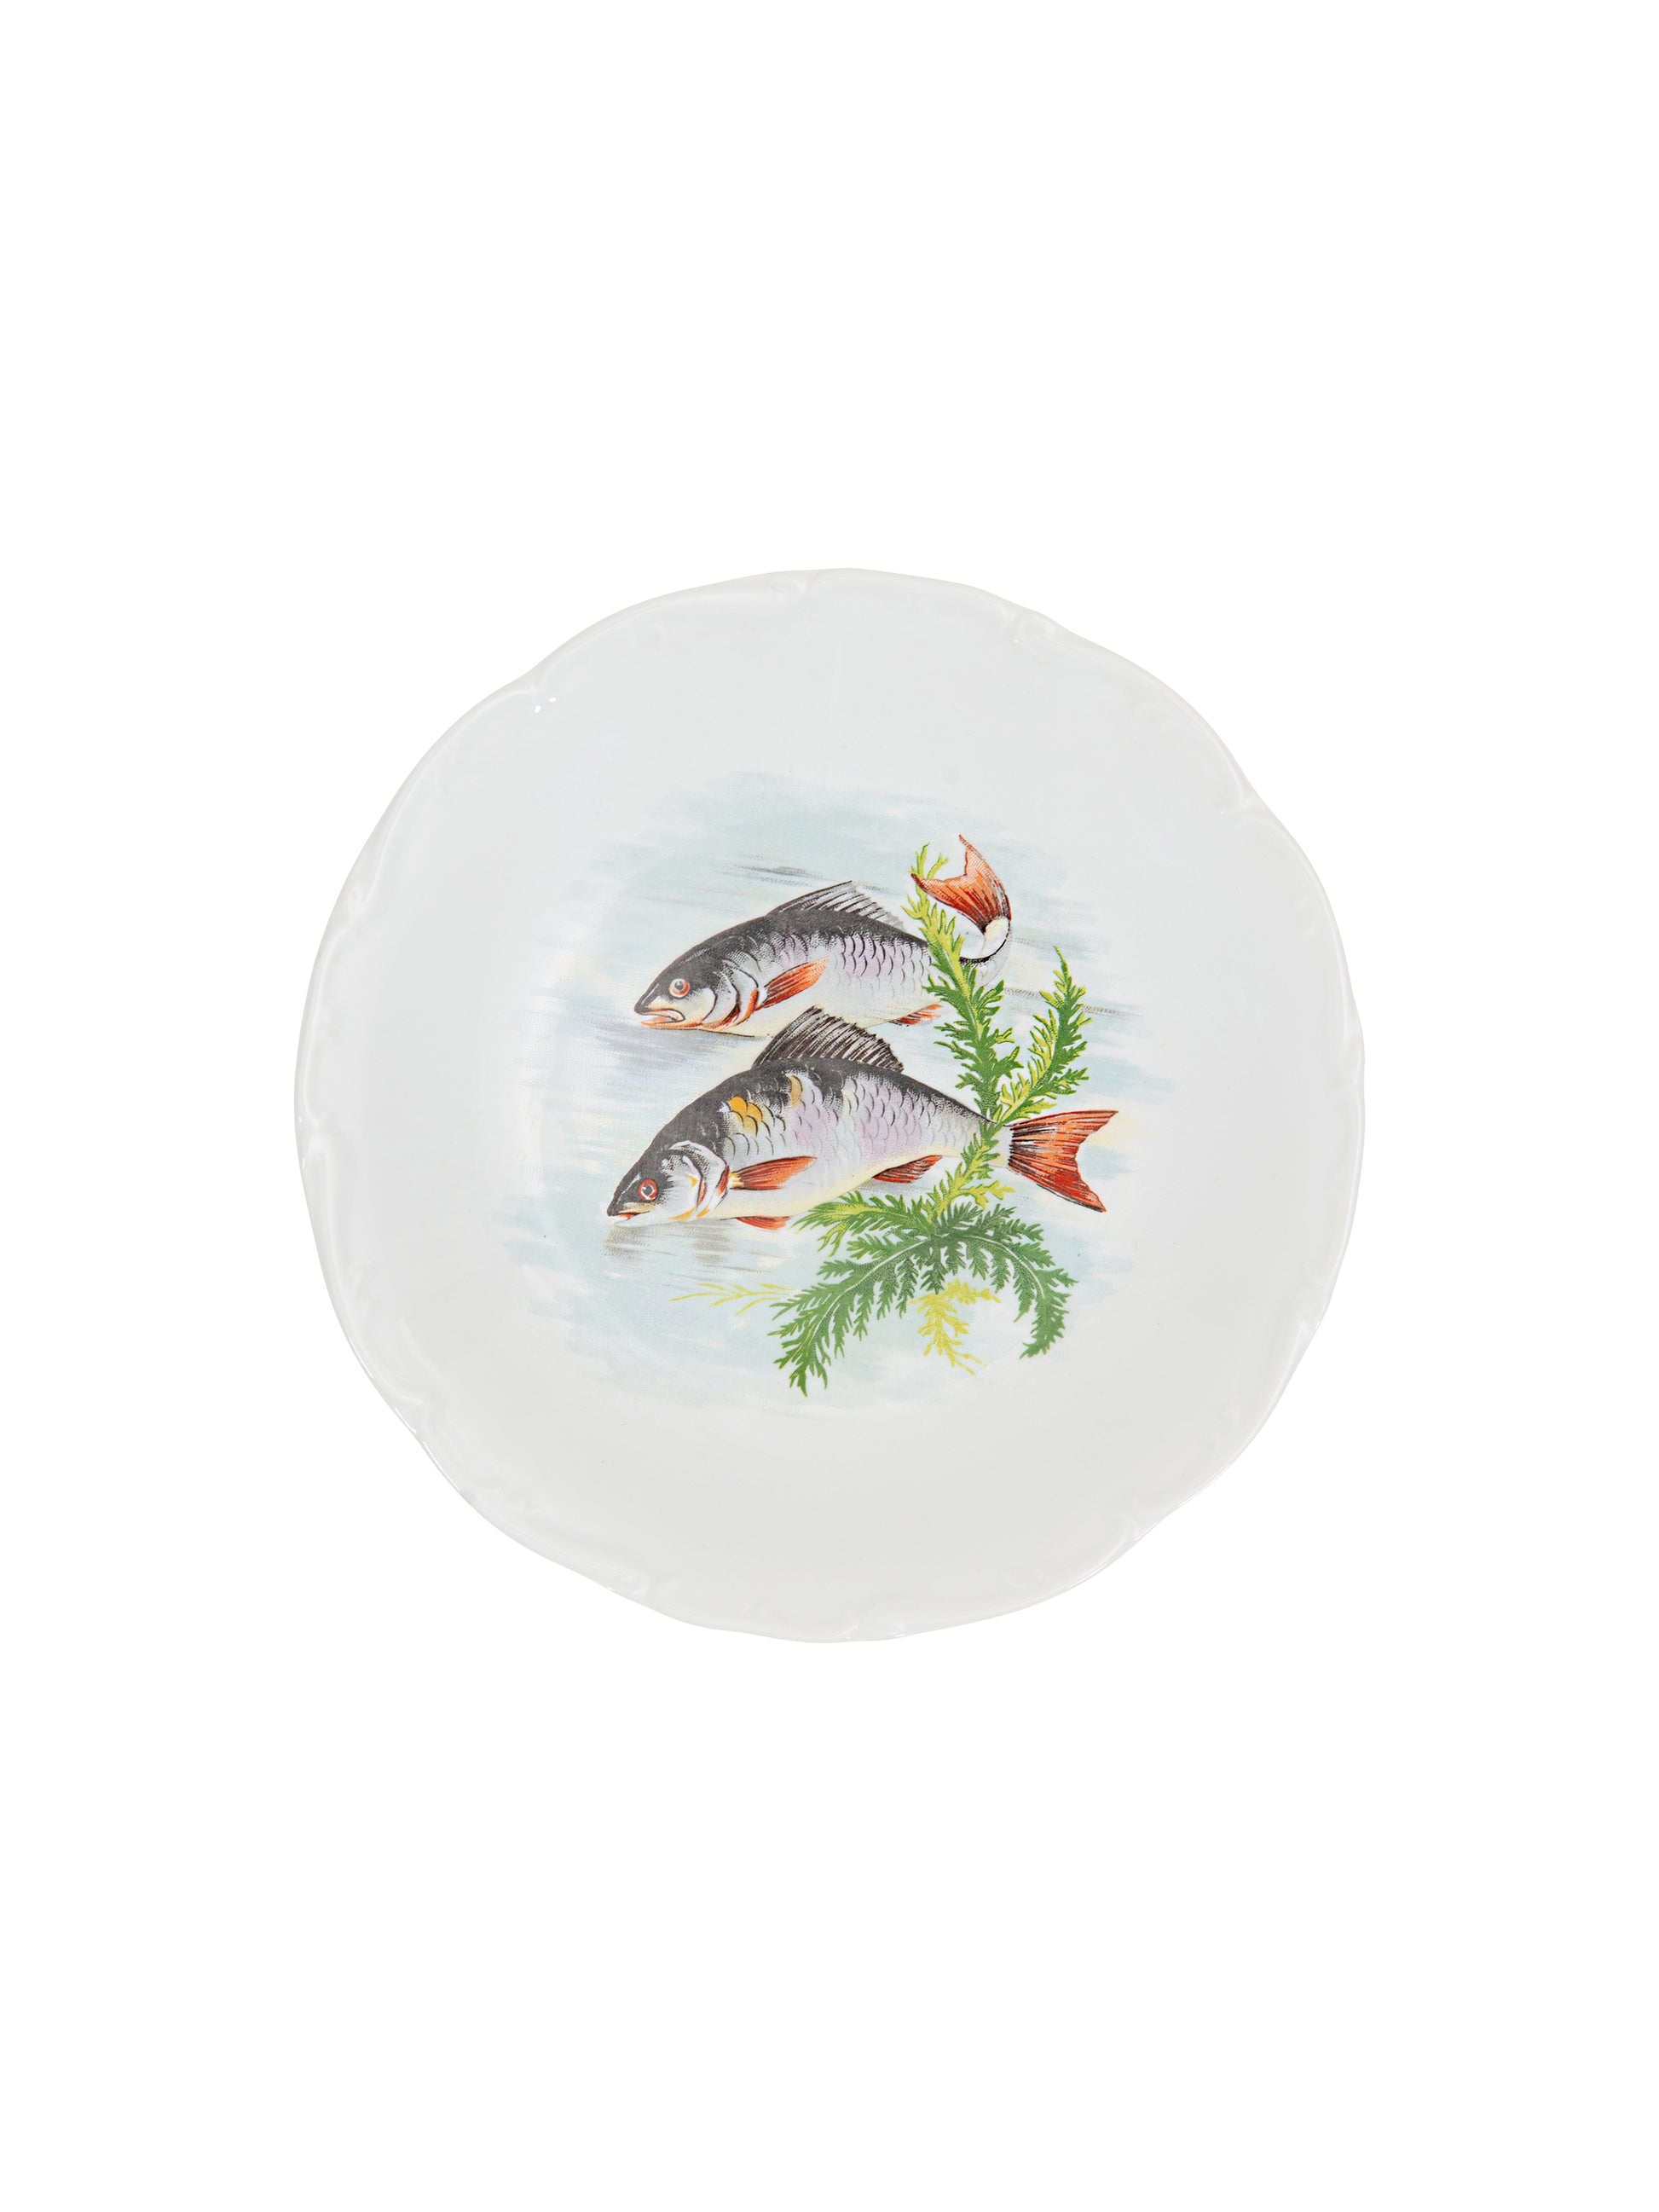 Vintage Sologne Fish Dinnerware Collection Plate 4 Weston Table